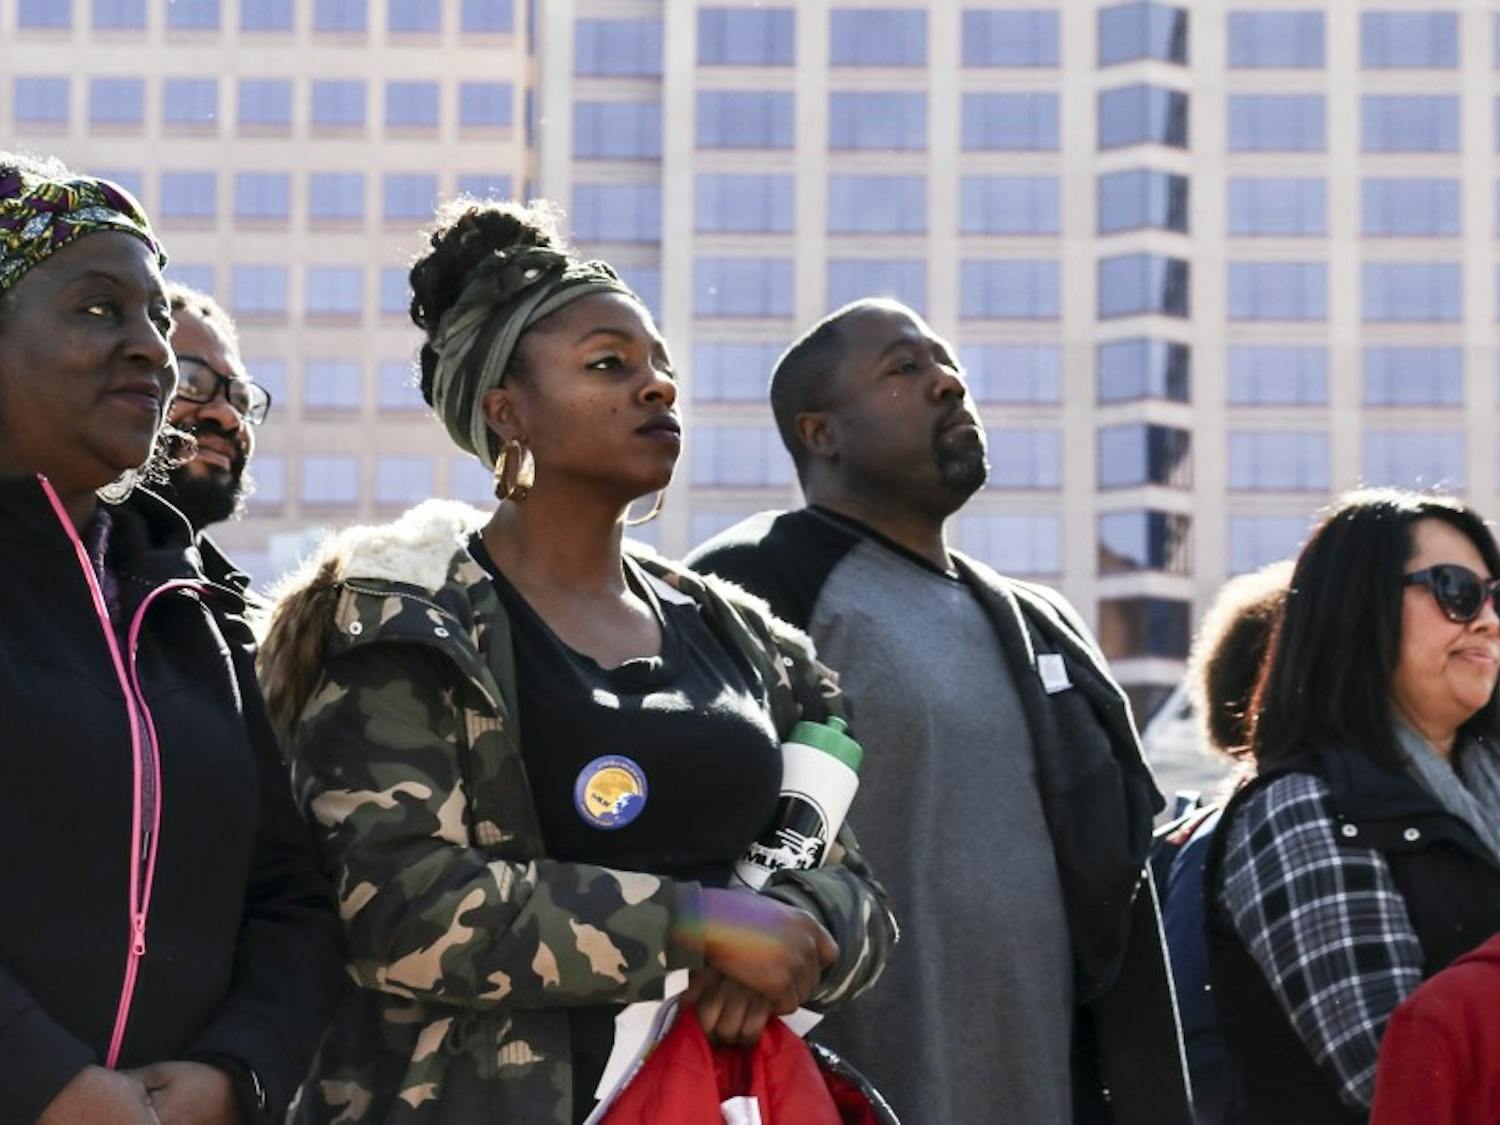 After marching from Dr. MLK Jr. Ave., participants stand strong as speakers address a large audience in Civic Plaza on Jan. 13, 2018.  